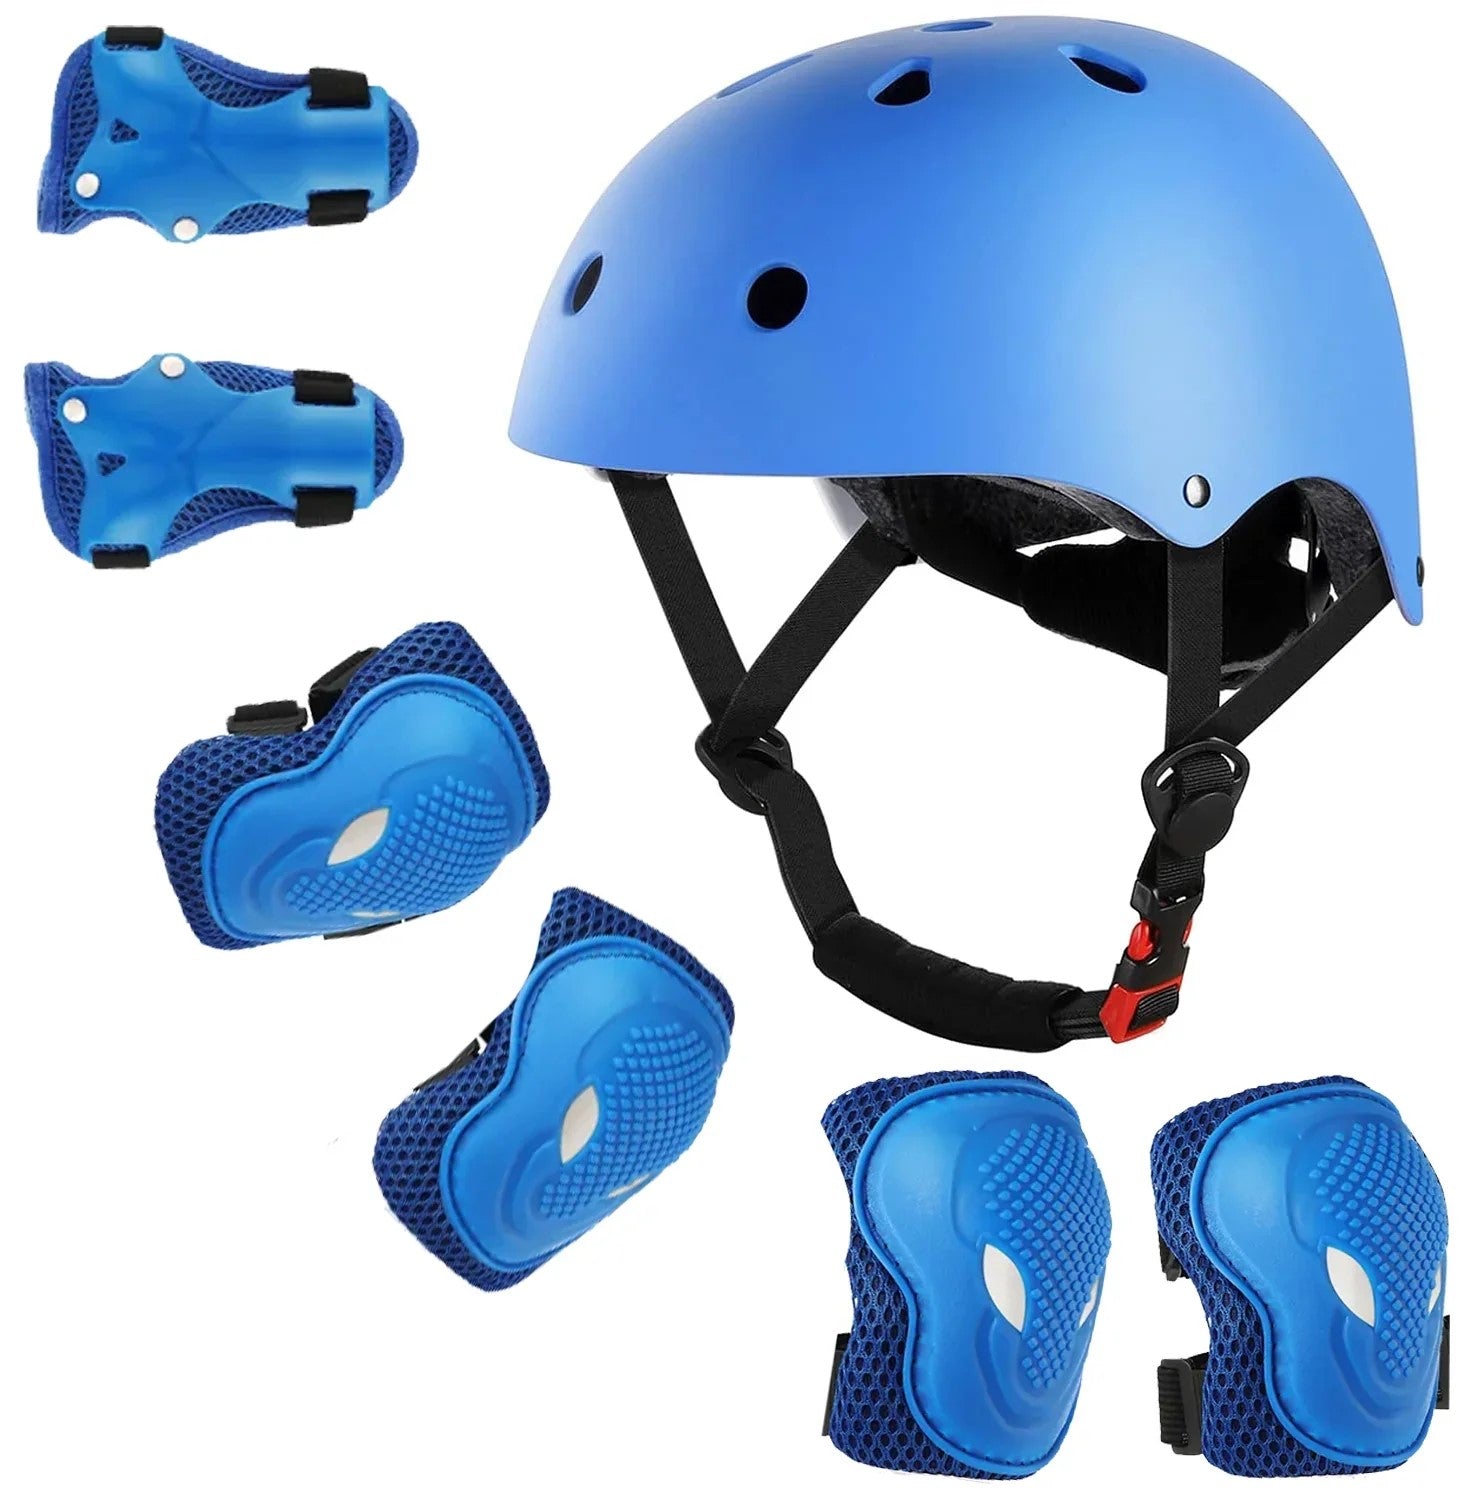 Skateboard Helmets and Pads For Adults and Kids